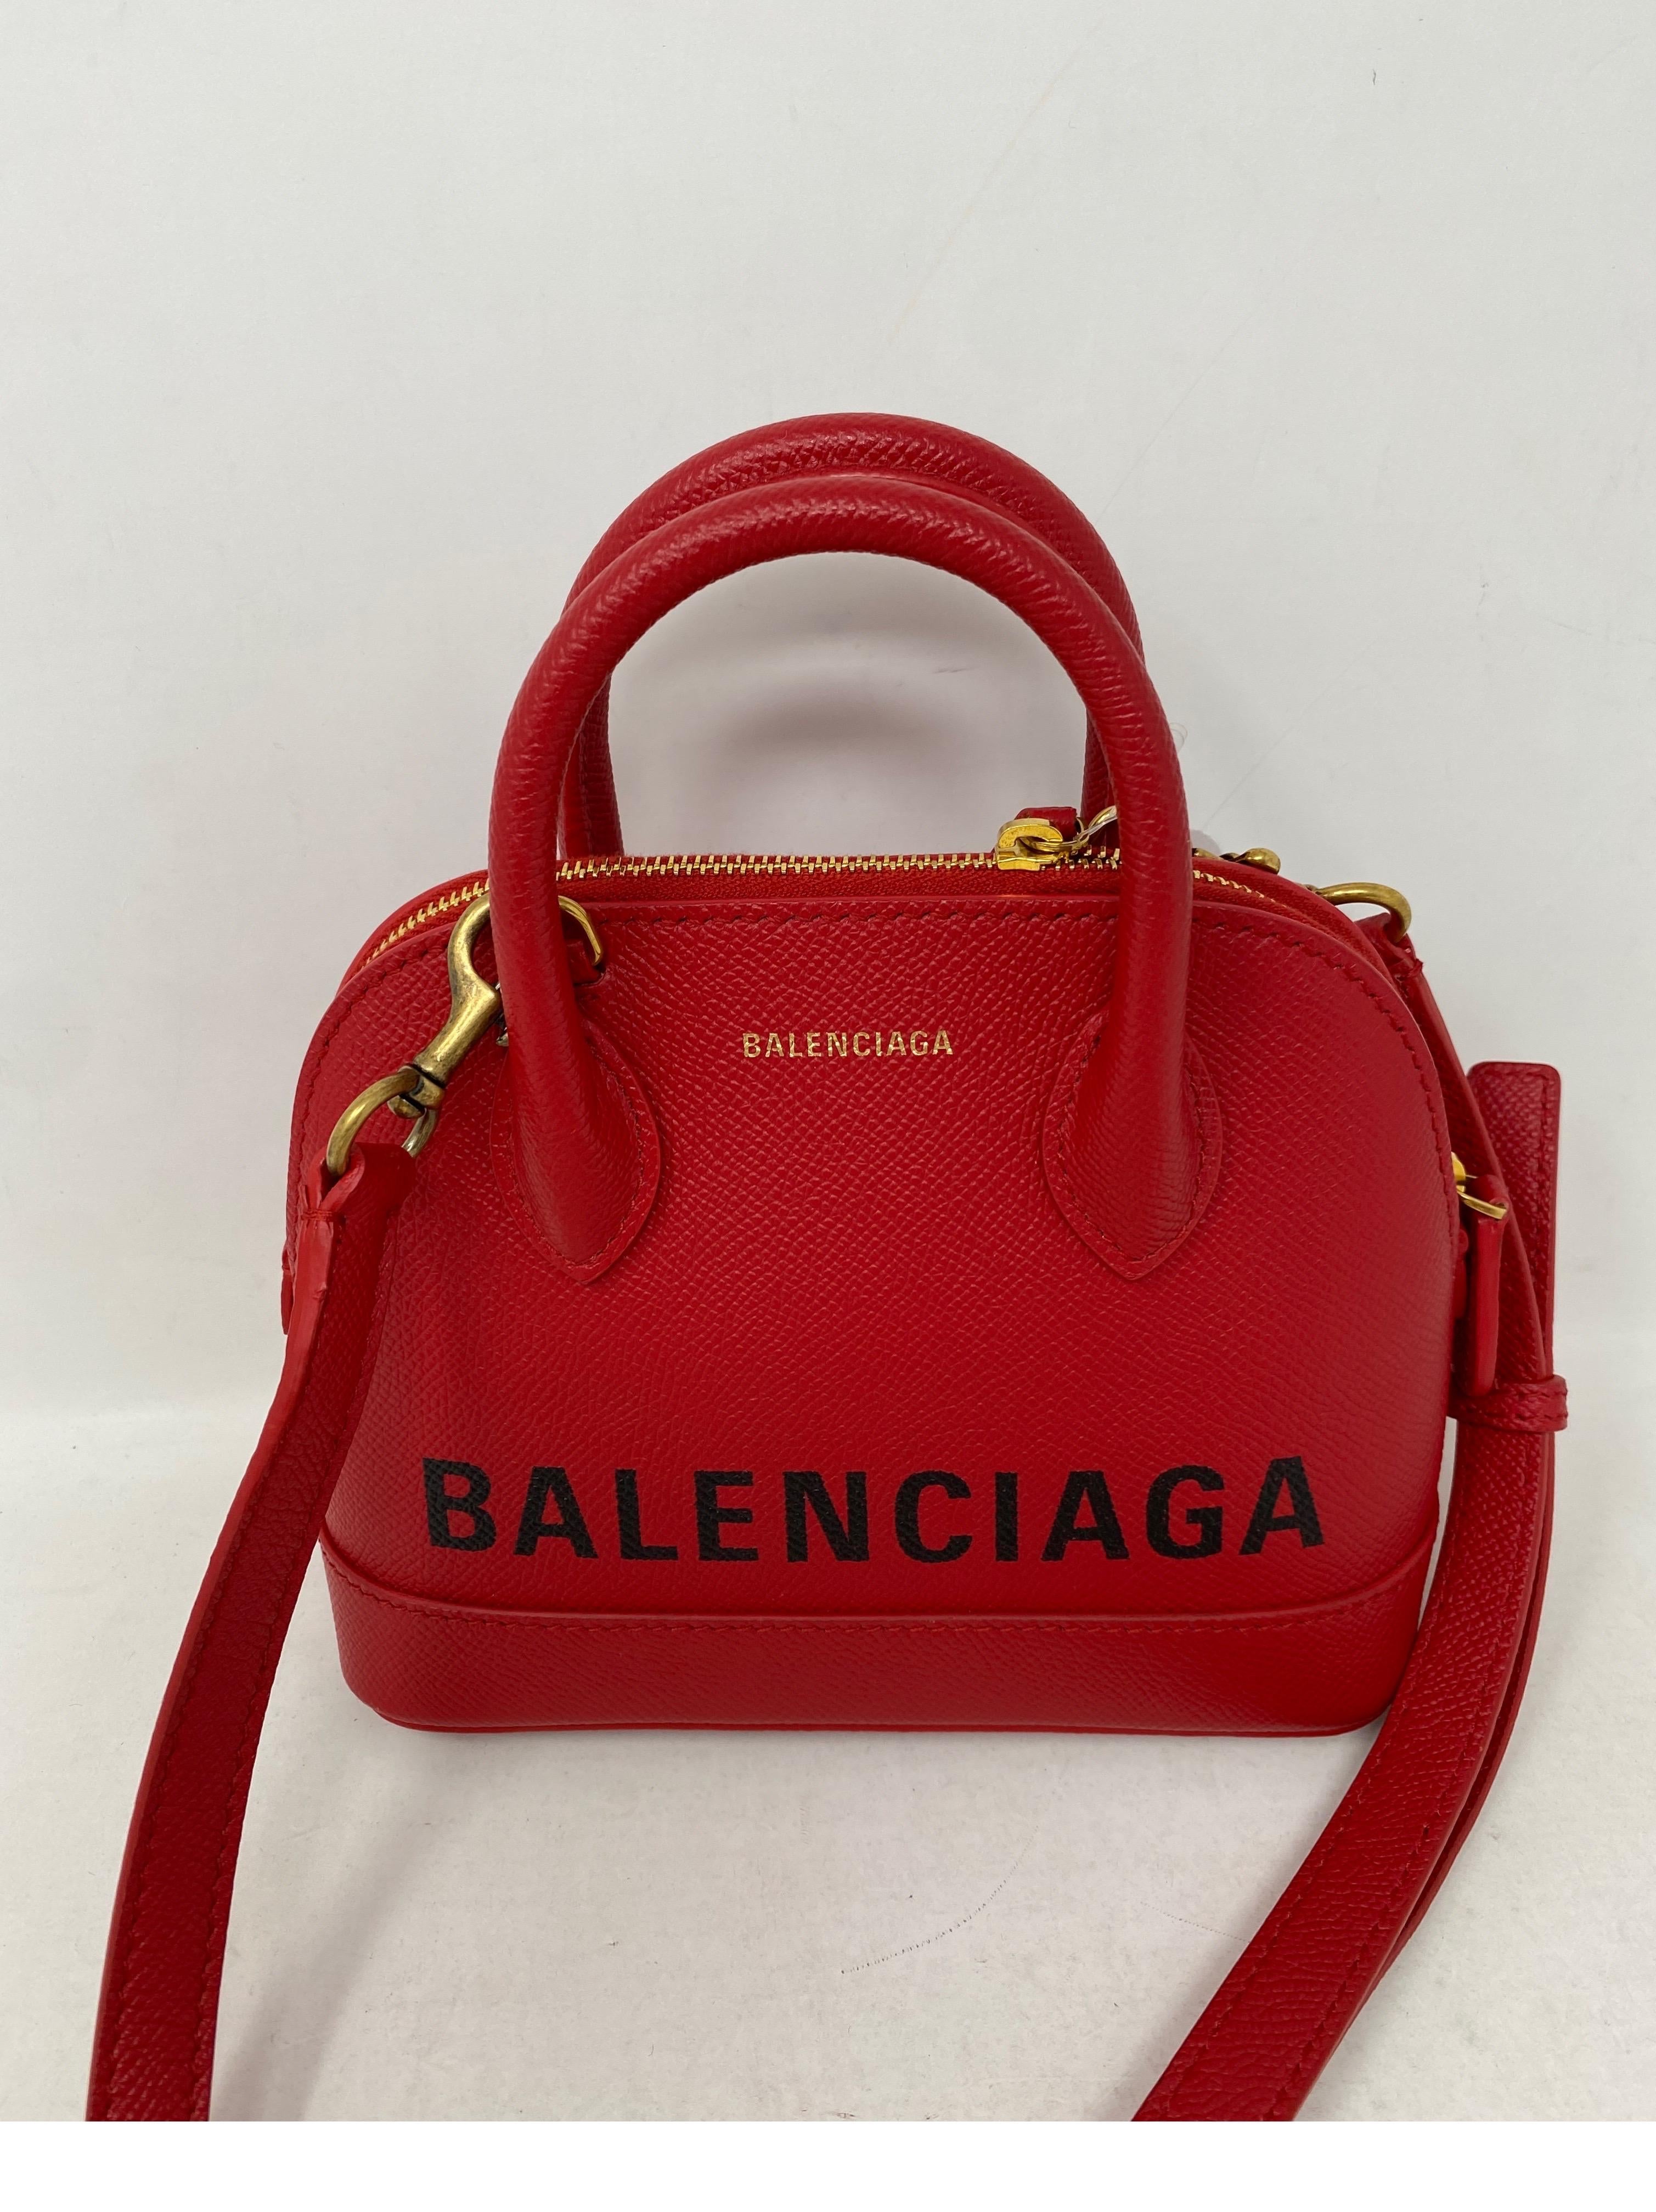 Balenciaga Red Mini Top Handle Bag. Red leather wih Balenciaga lettering. Detachable strap. New condition. Very cute bag. Guaranteed authentic. 